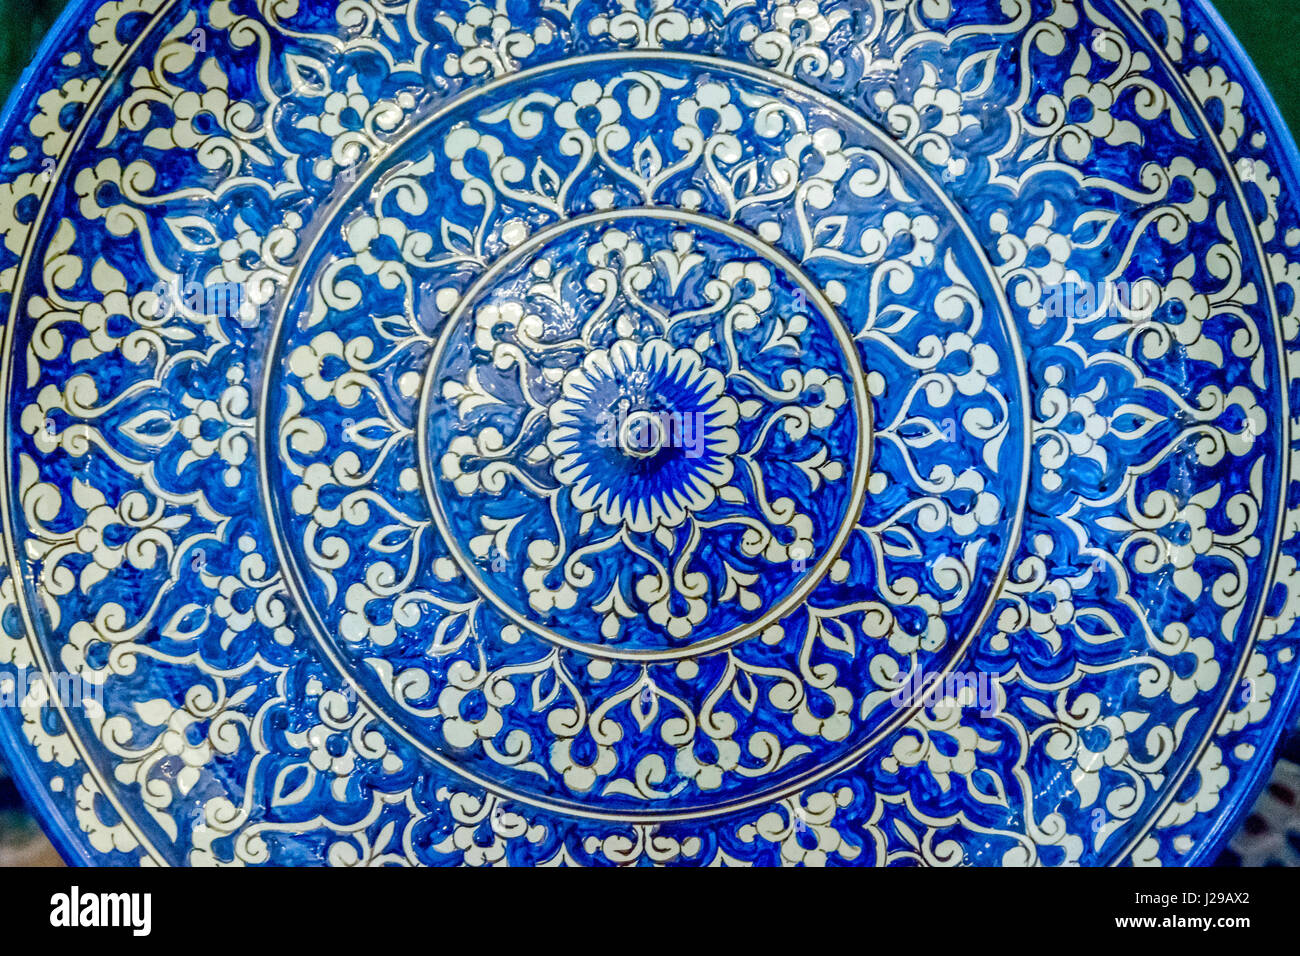 Ceramics with hand painted blue and white traditional uzbek patterns Stock Photo